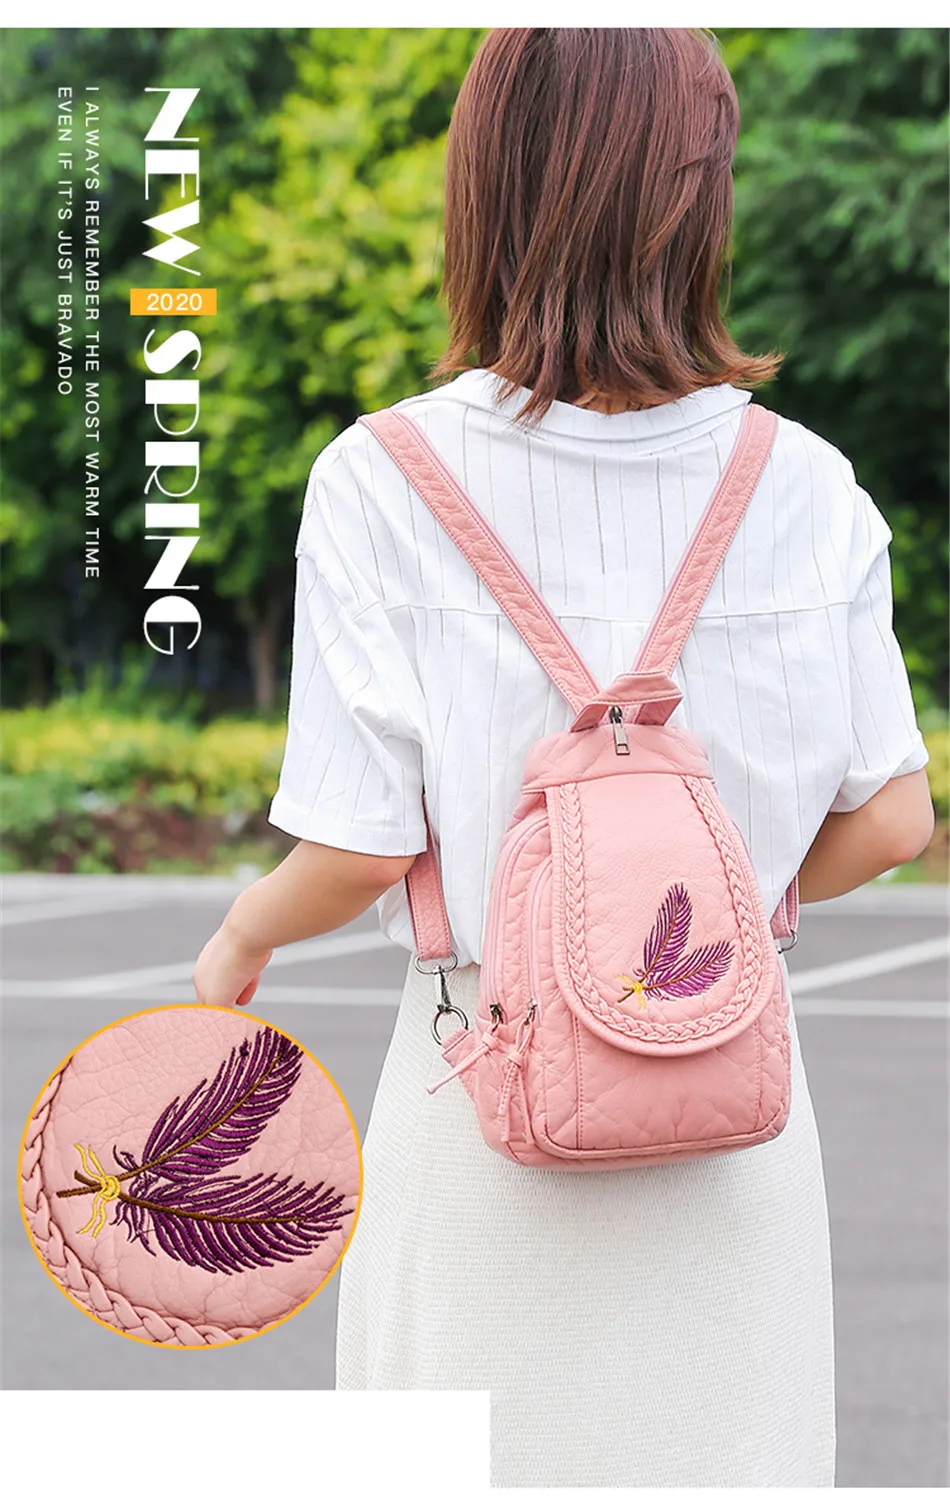 New Multiple Colour Fashion Embroidery Pattern Backpack  Luxury Mini Backpack Women Designer High Quality Leather Softback 2021